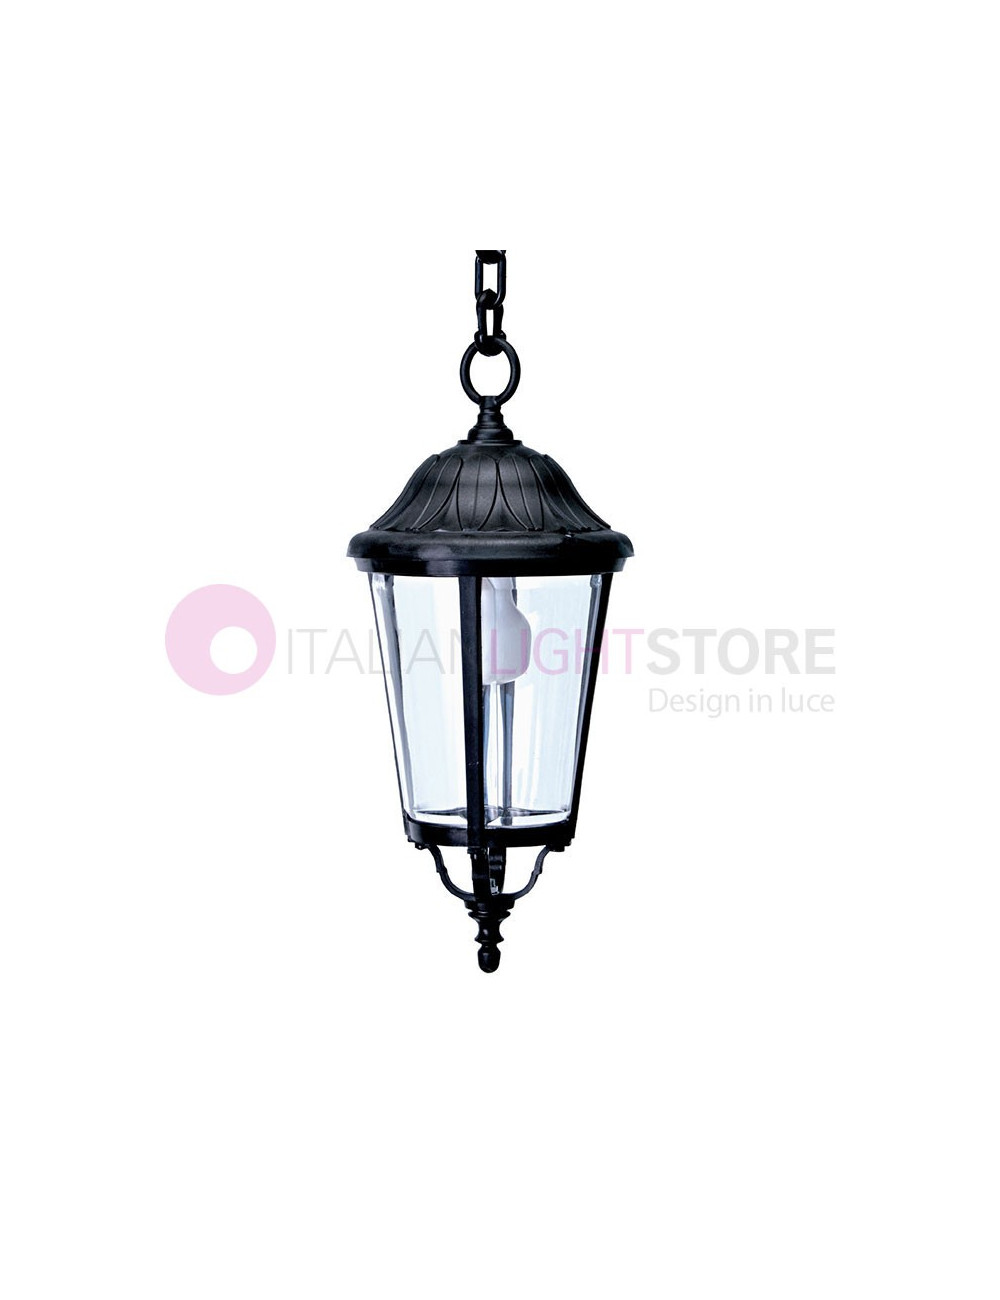 ANNECY Classic Traditional Outdoor Pendant Lantern